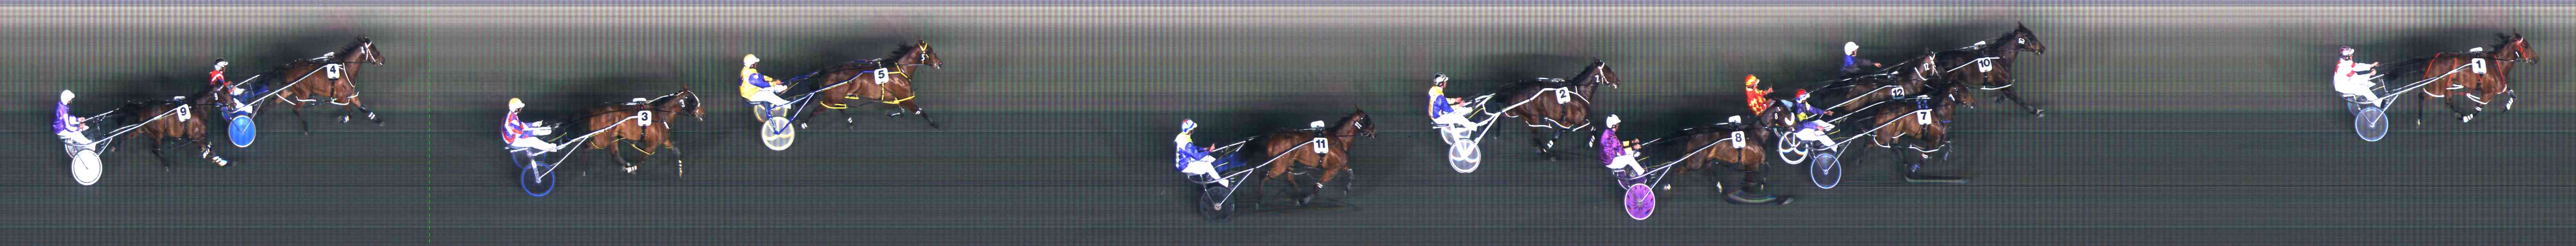 Photo Finish Pictures and Video Race Replays Supplied and Updated on the Website by CFM Technology